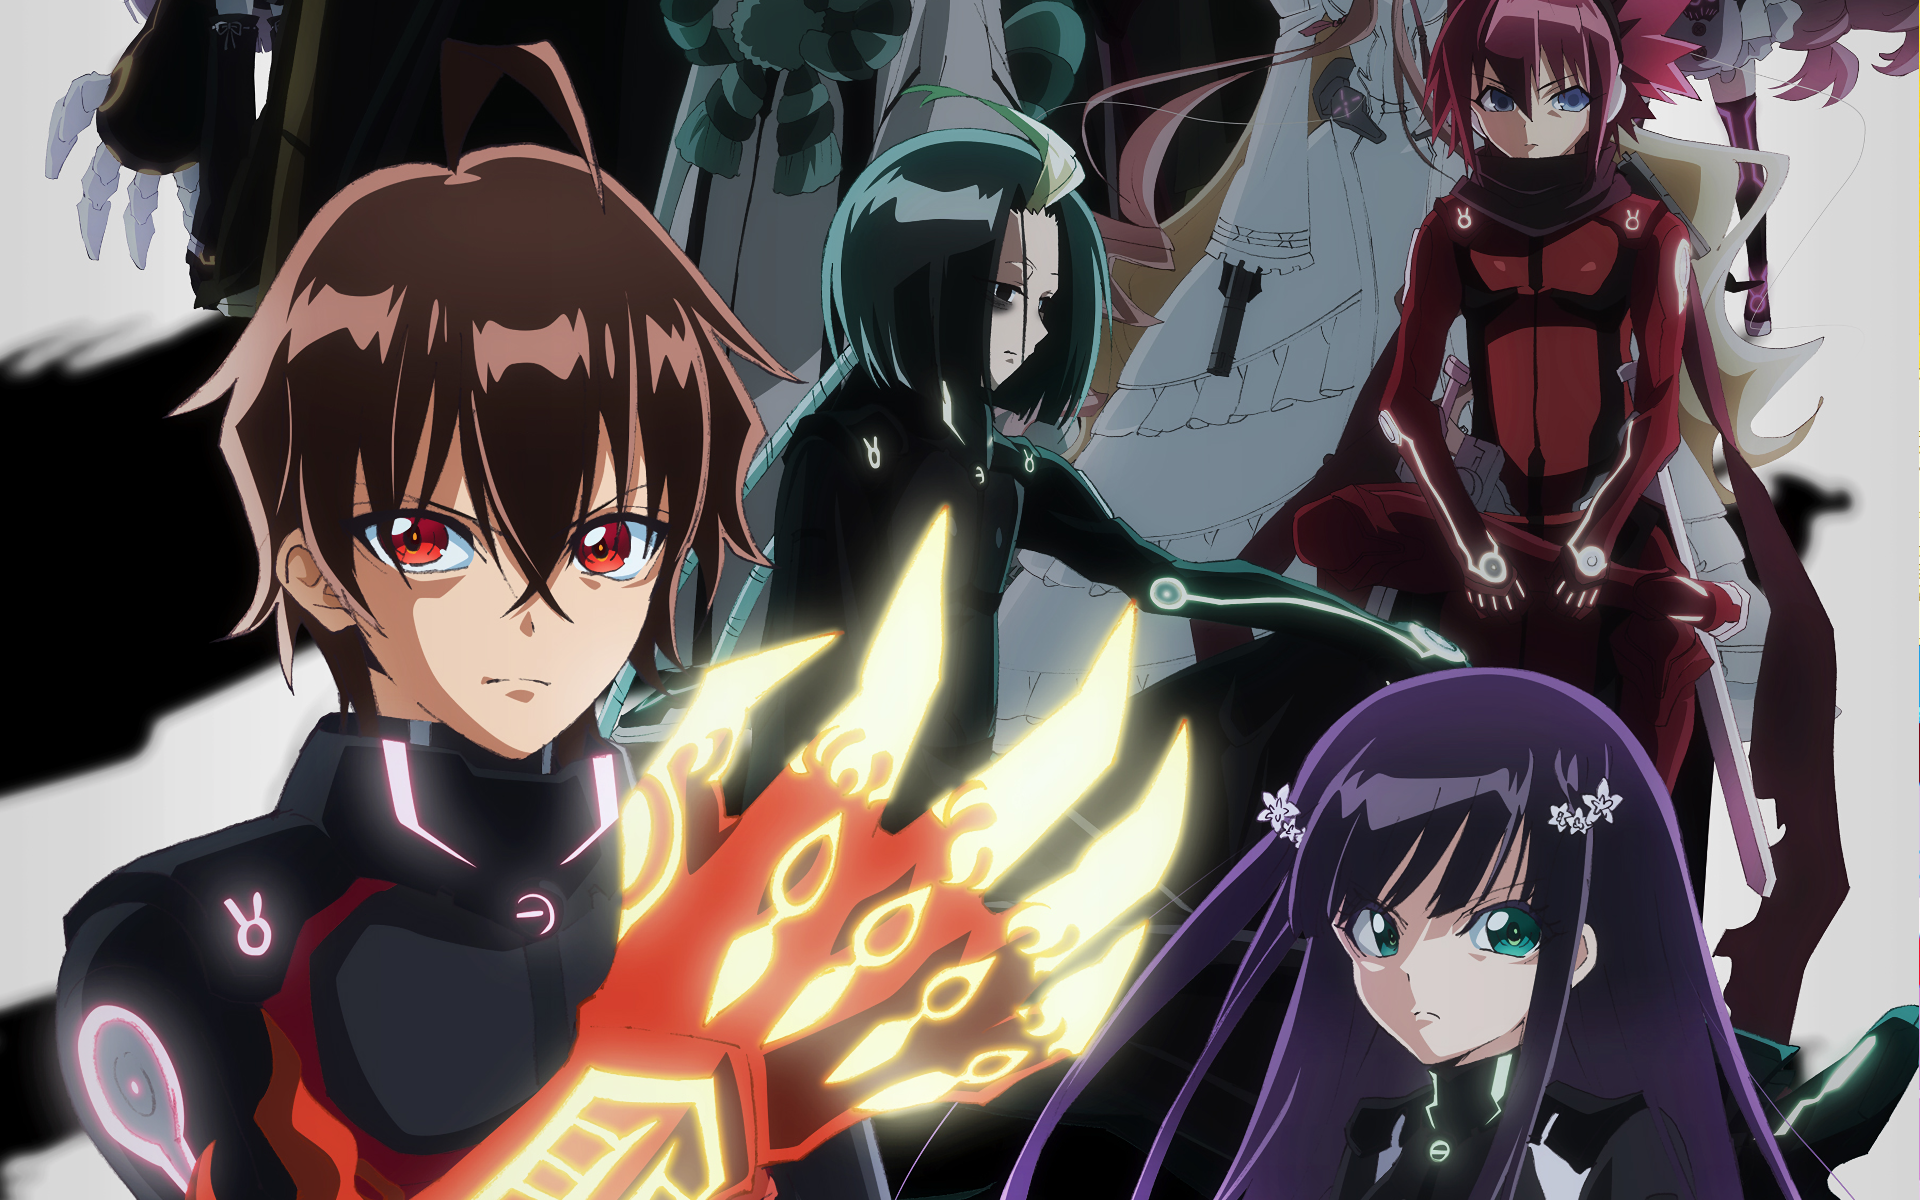 Twin Star Exorcists – All the Anime